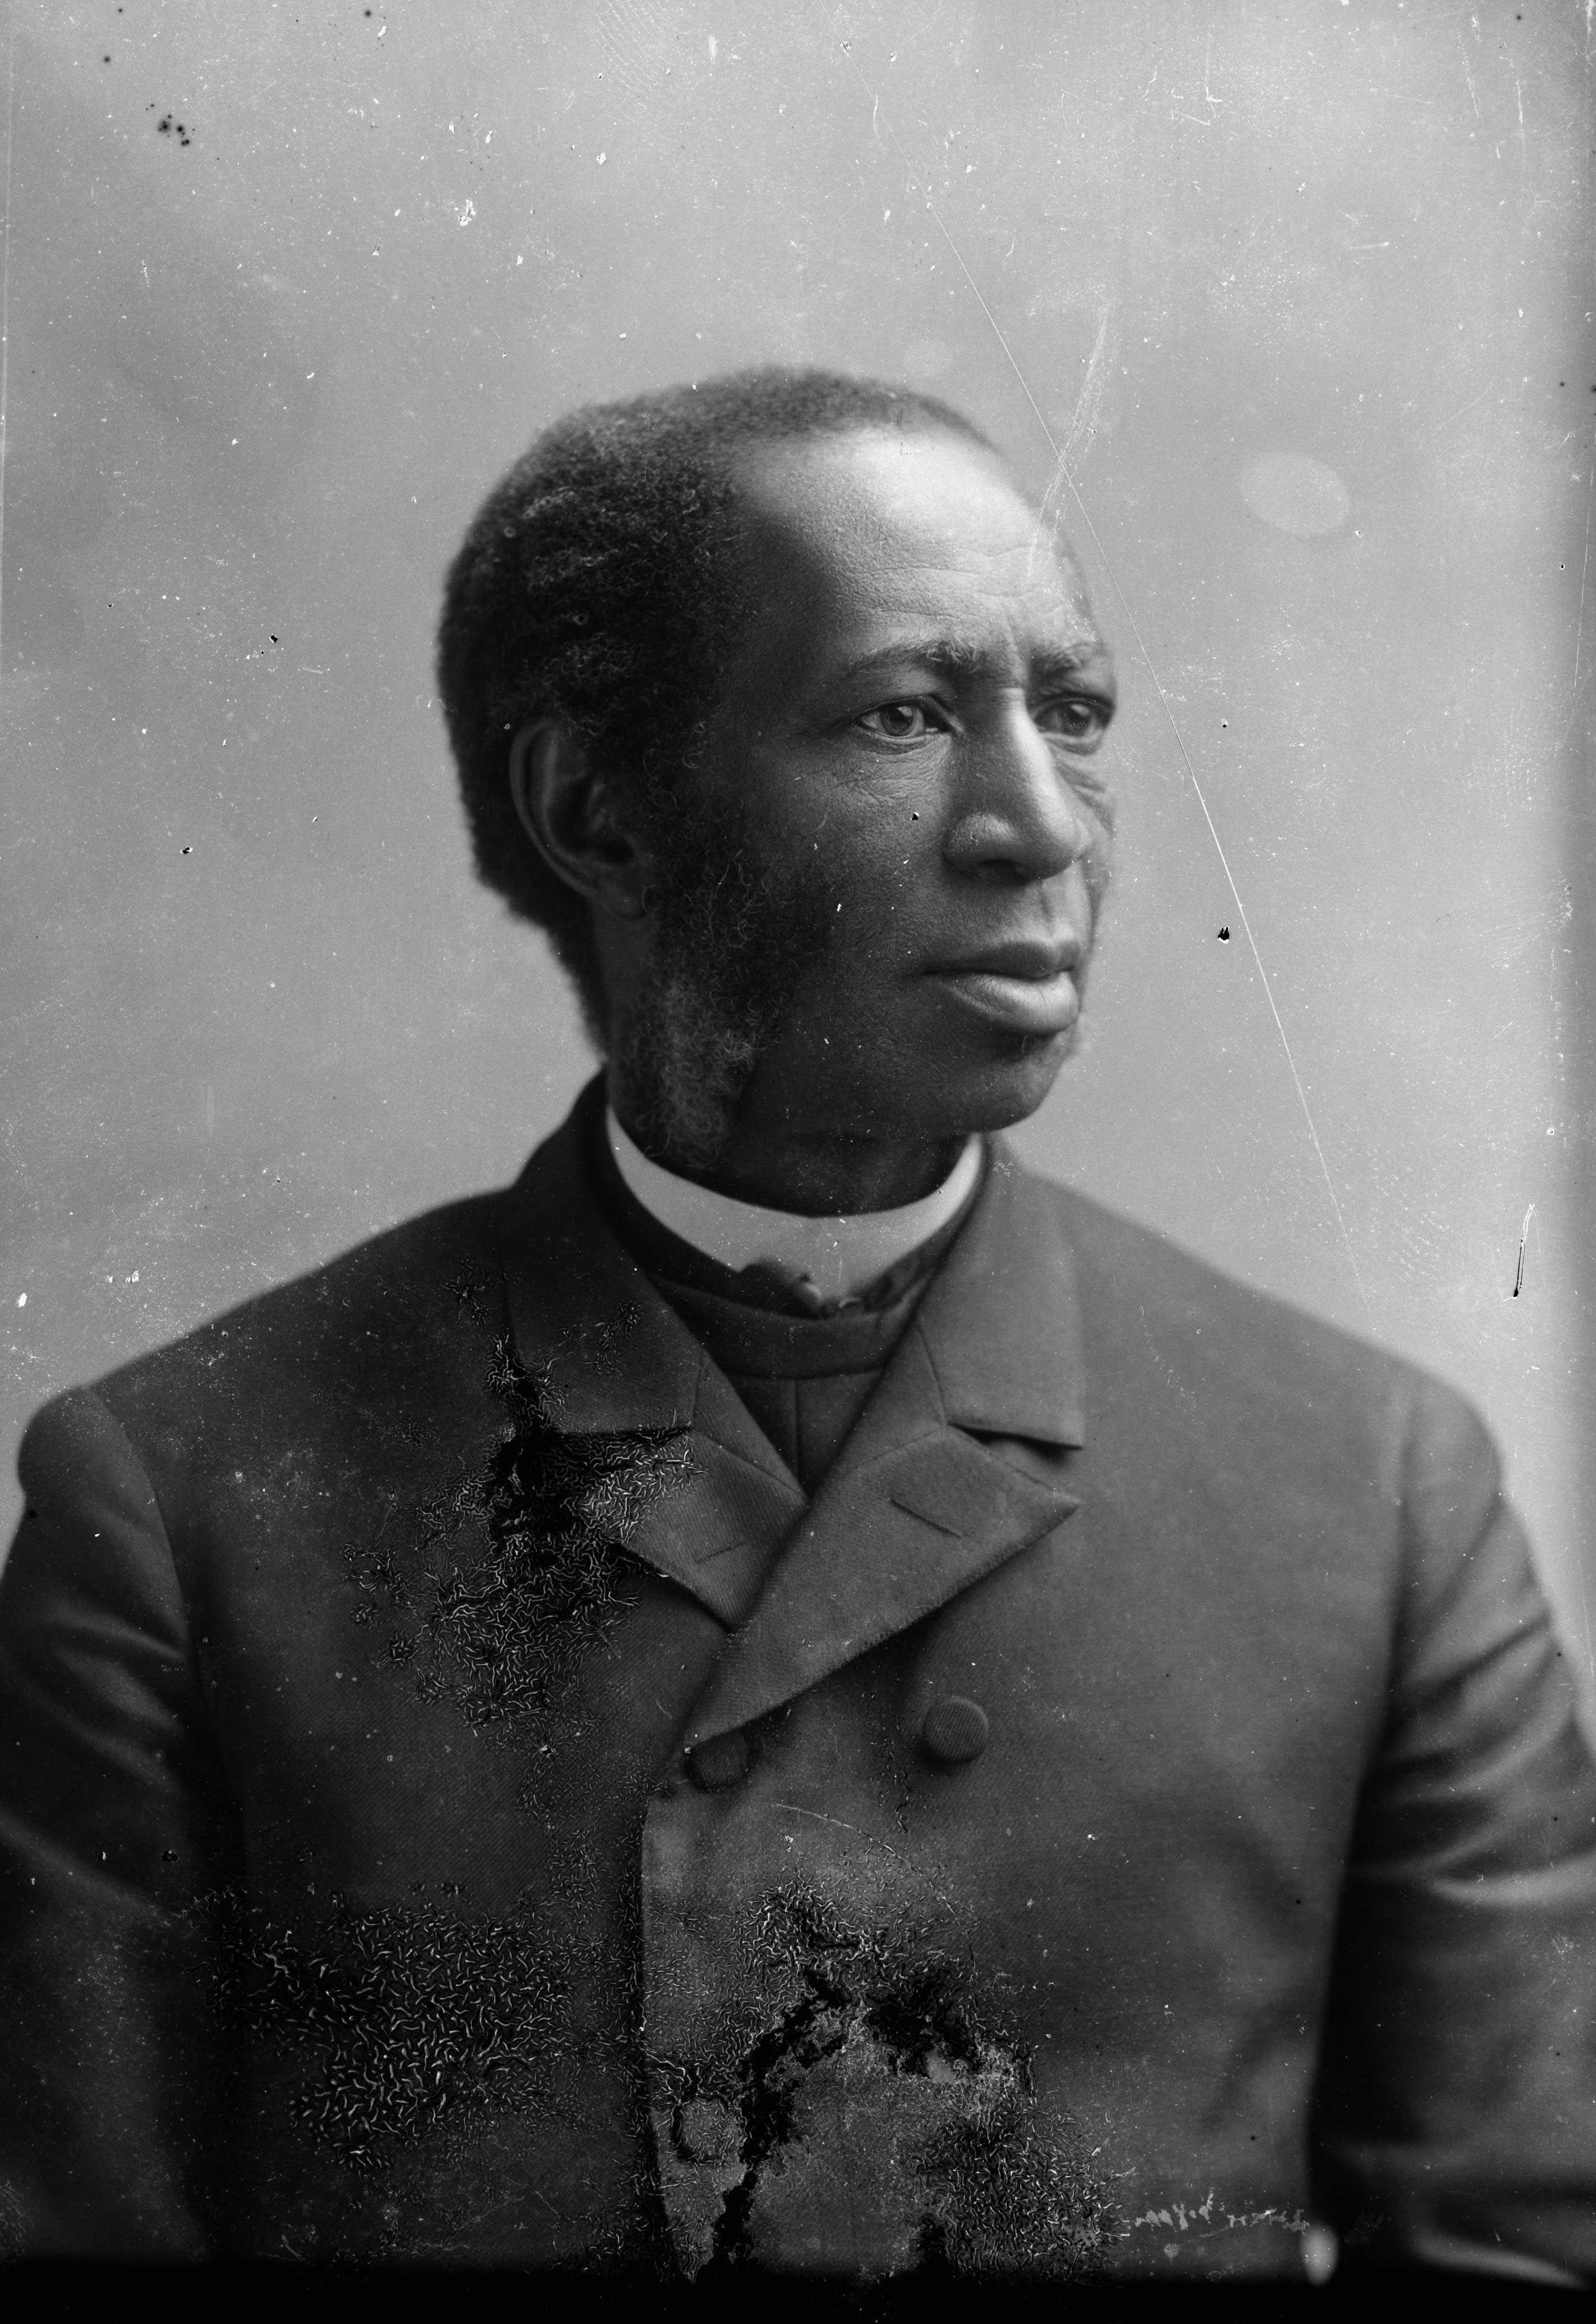 A worn black and white photo of Reverend Richard Harvey Cain. He is looking off camera in a suit.